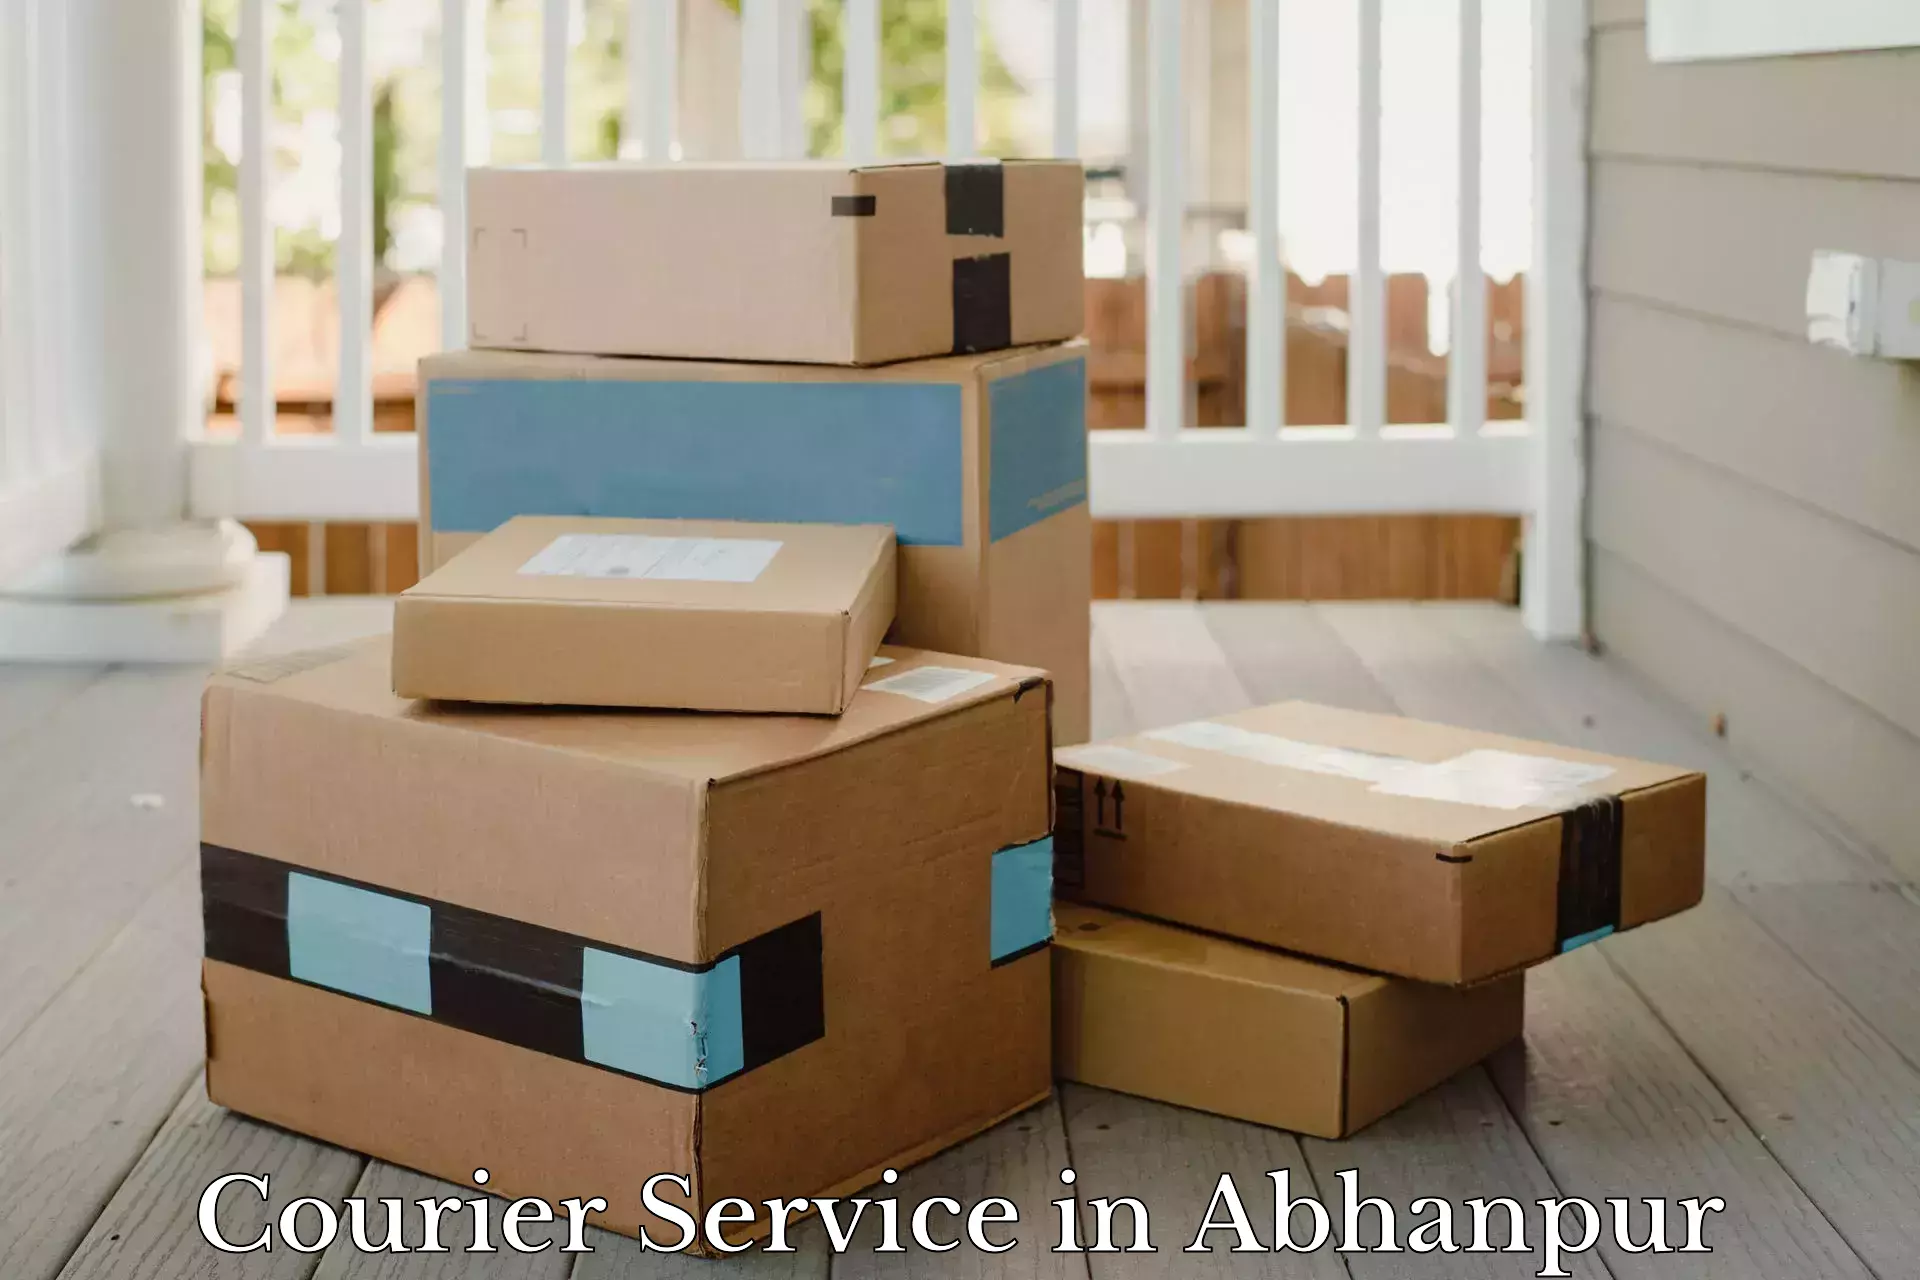 Premium courier services in Abhanpur